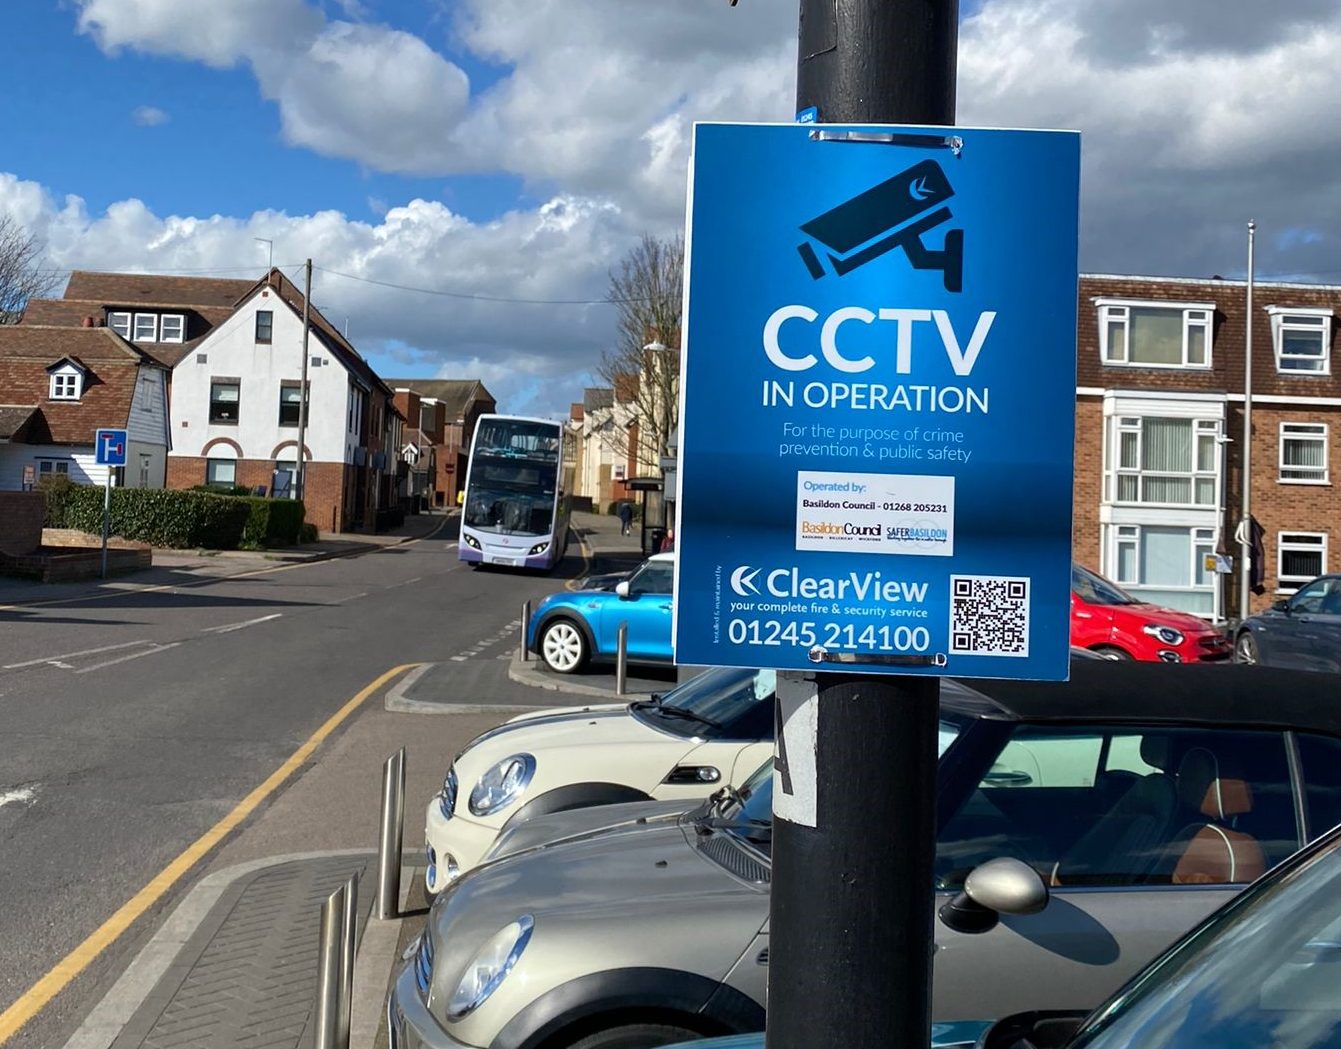 ClearView CCTV Cameras in Operation sign displayed on a post in a busy street